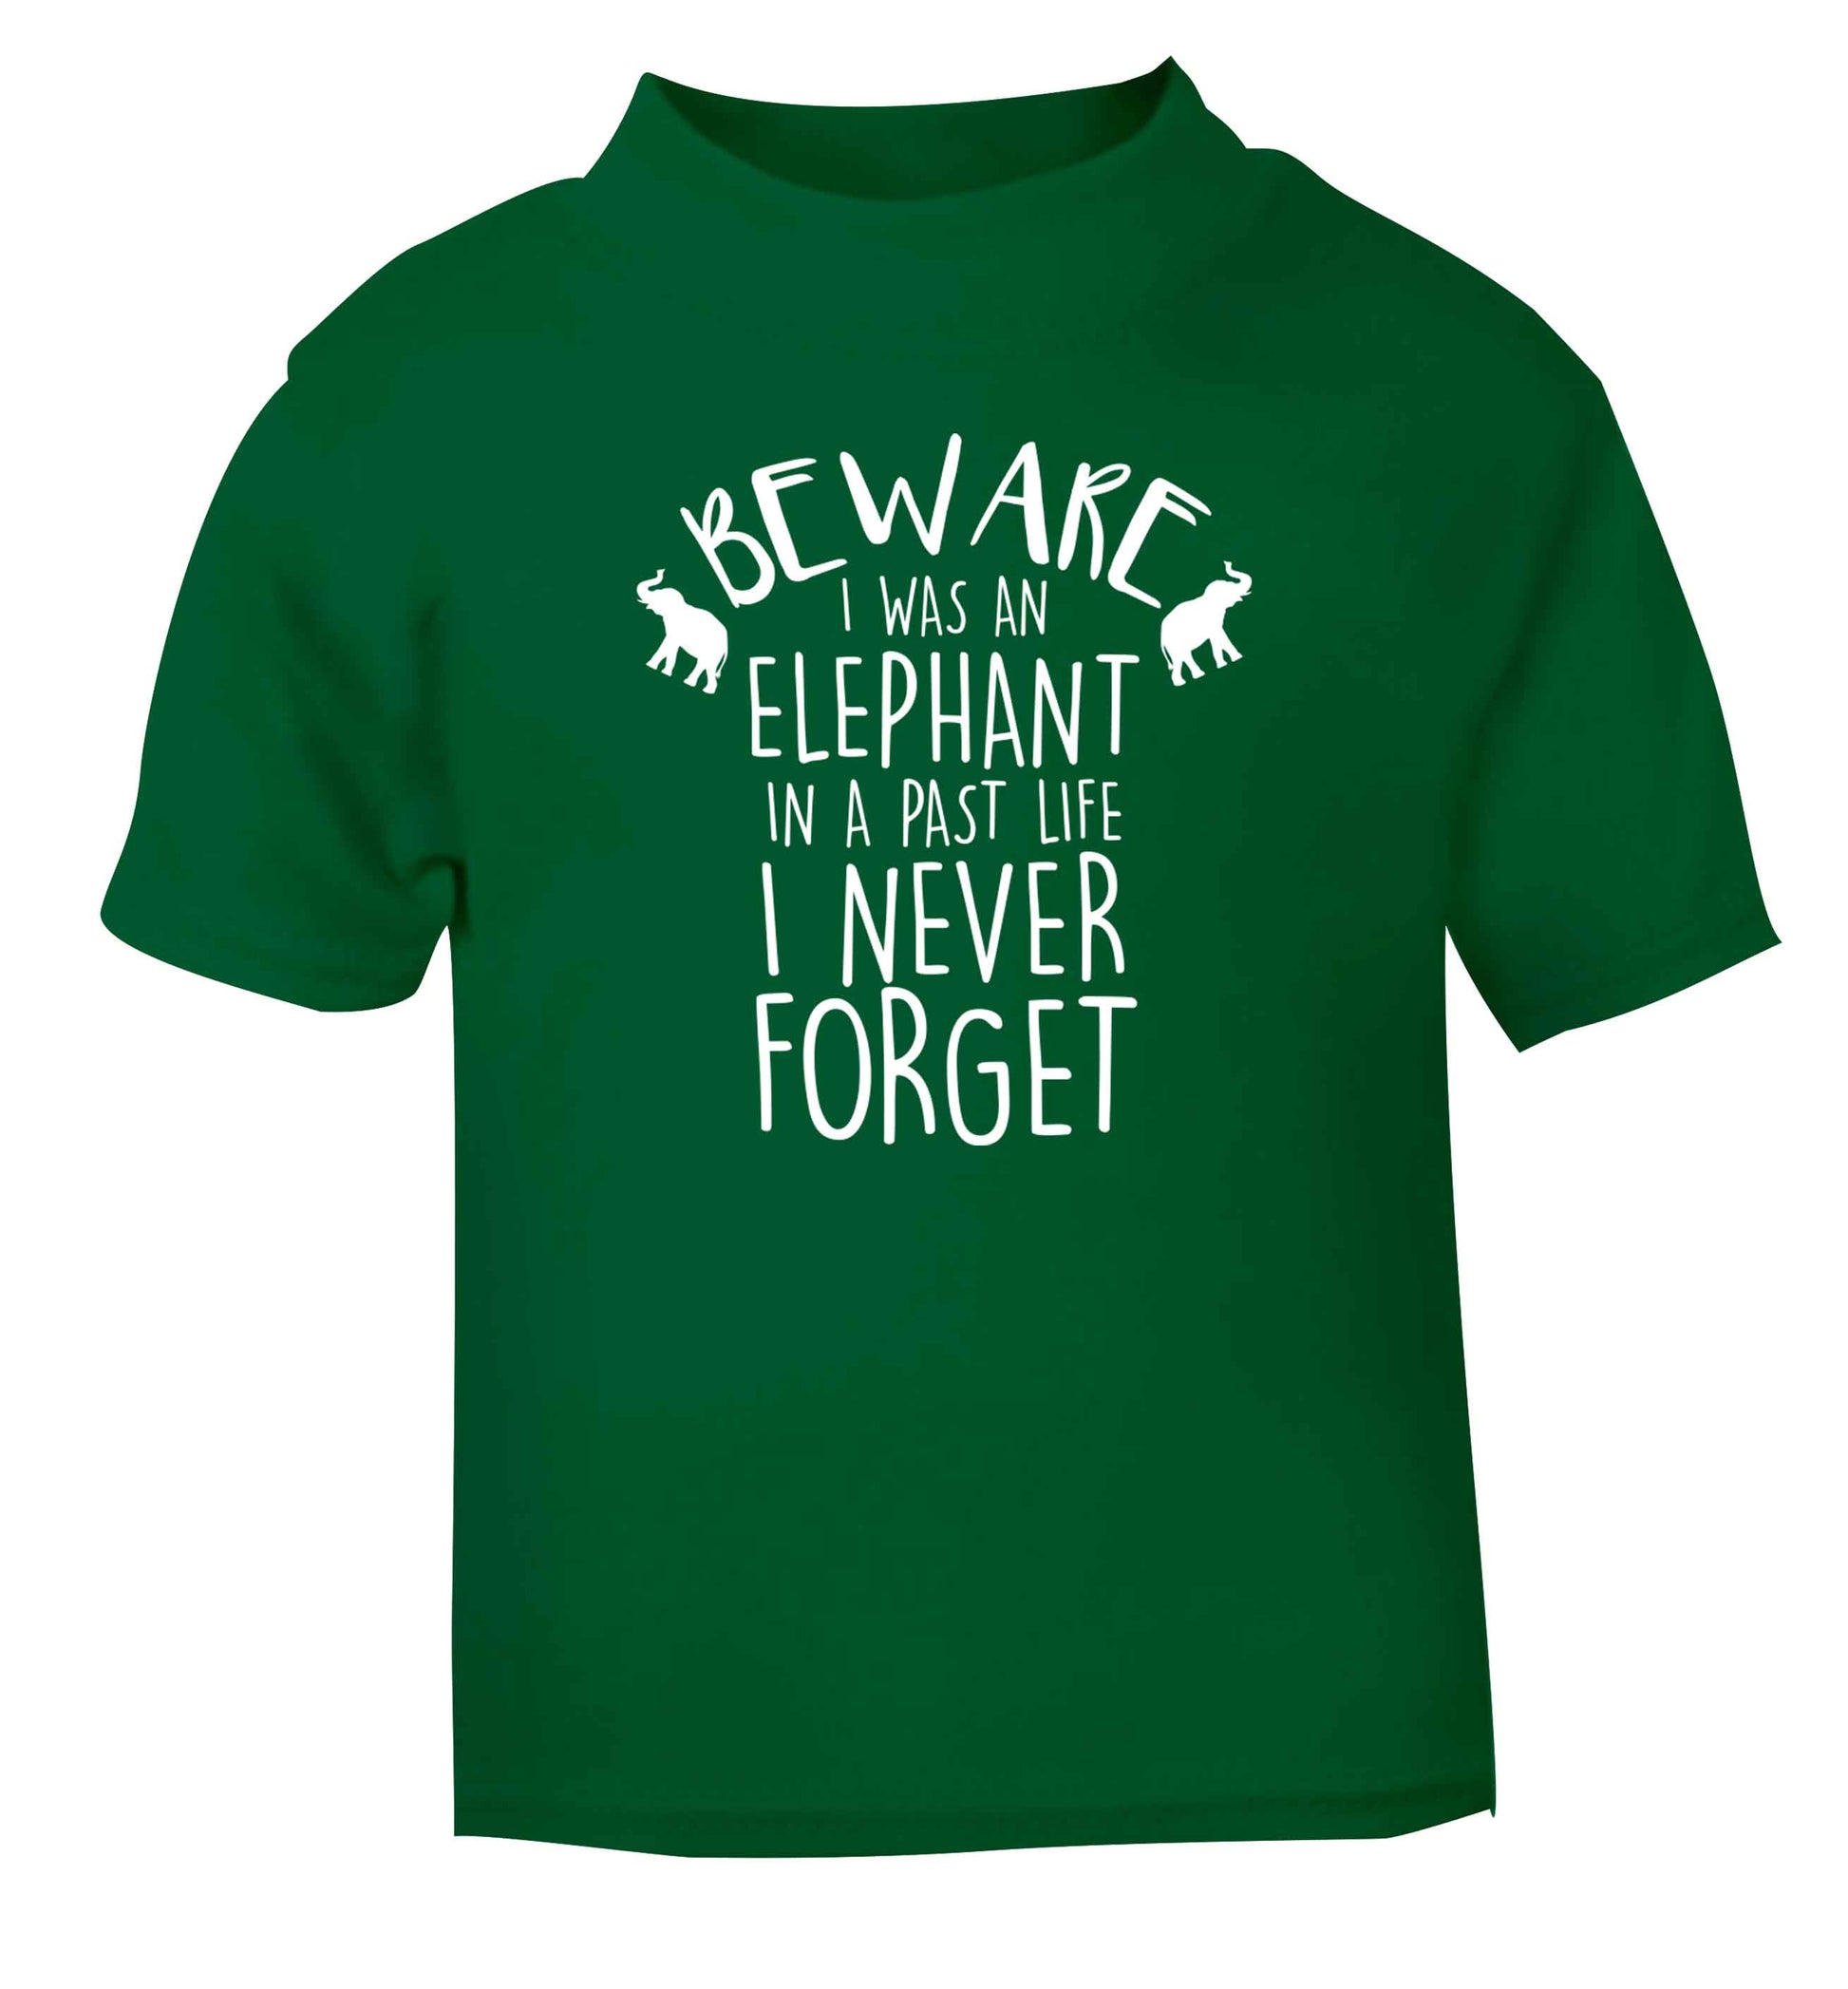 Beware I was an elephant in my past life I never forget green Baby Toddler Tshirt 2 Years